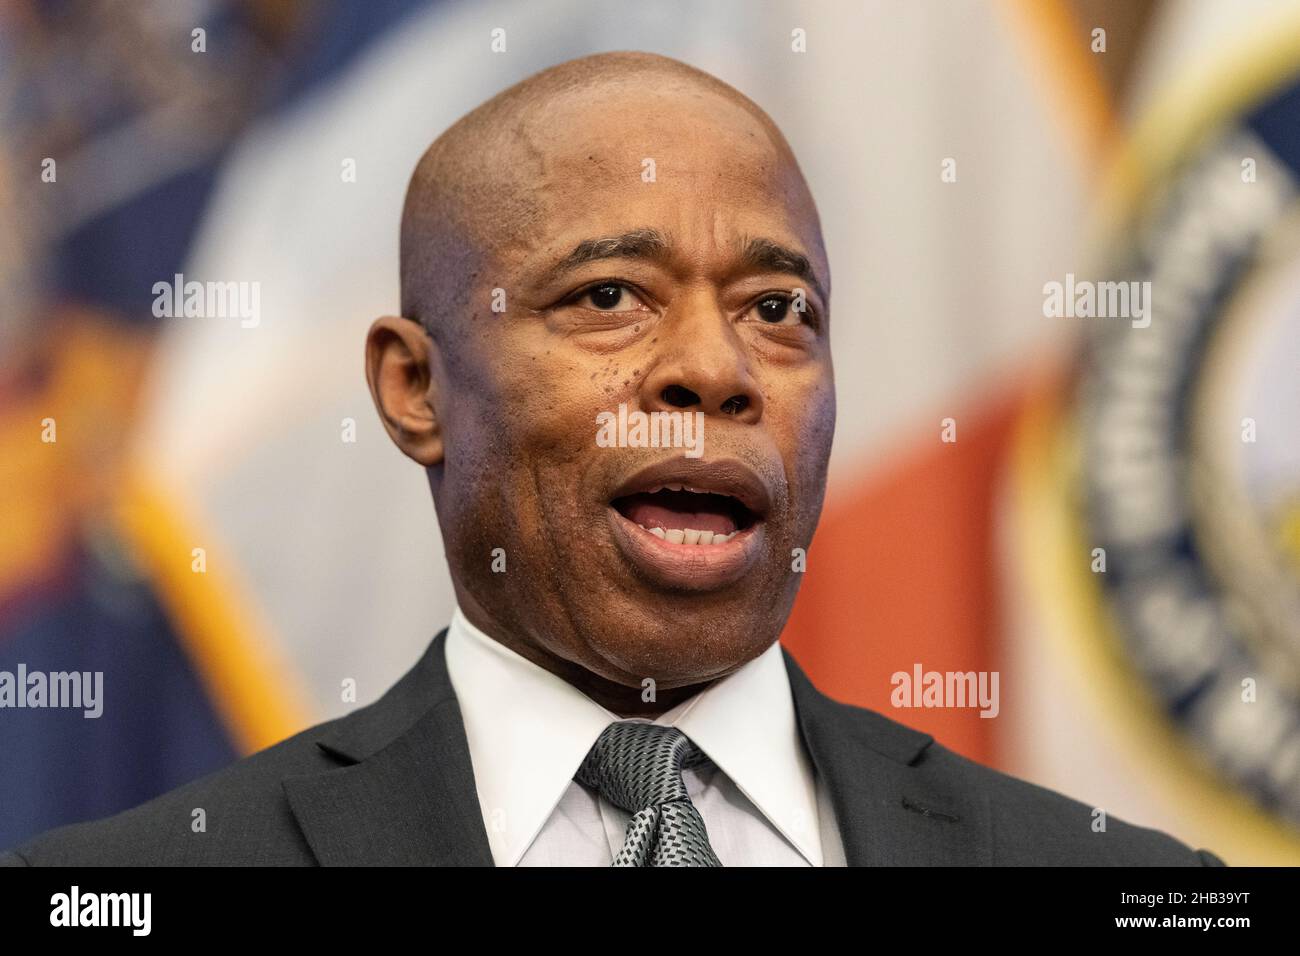 New York, NY - December 16, 2021: Mayor-elect Eric Adams speaks during announcement on his pick for Department of Correction Commissioner at Brooklyn Borough Hall Stock Photo